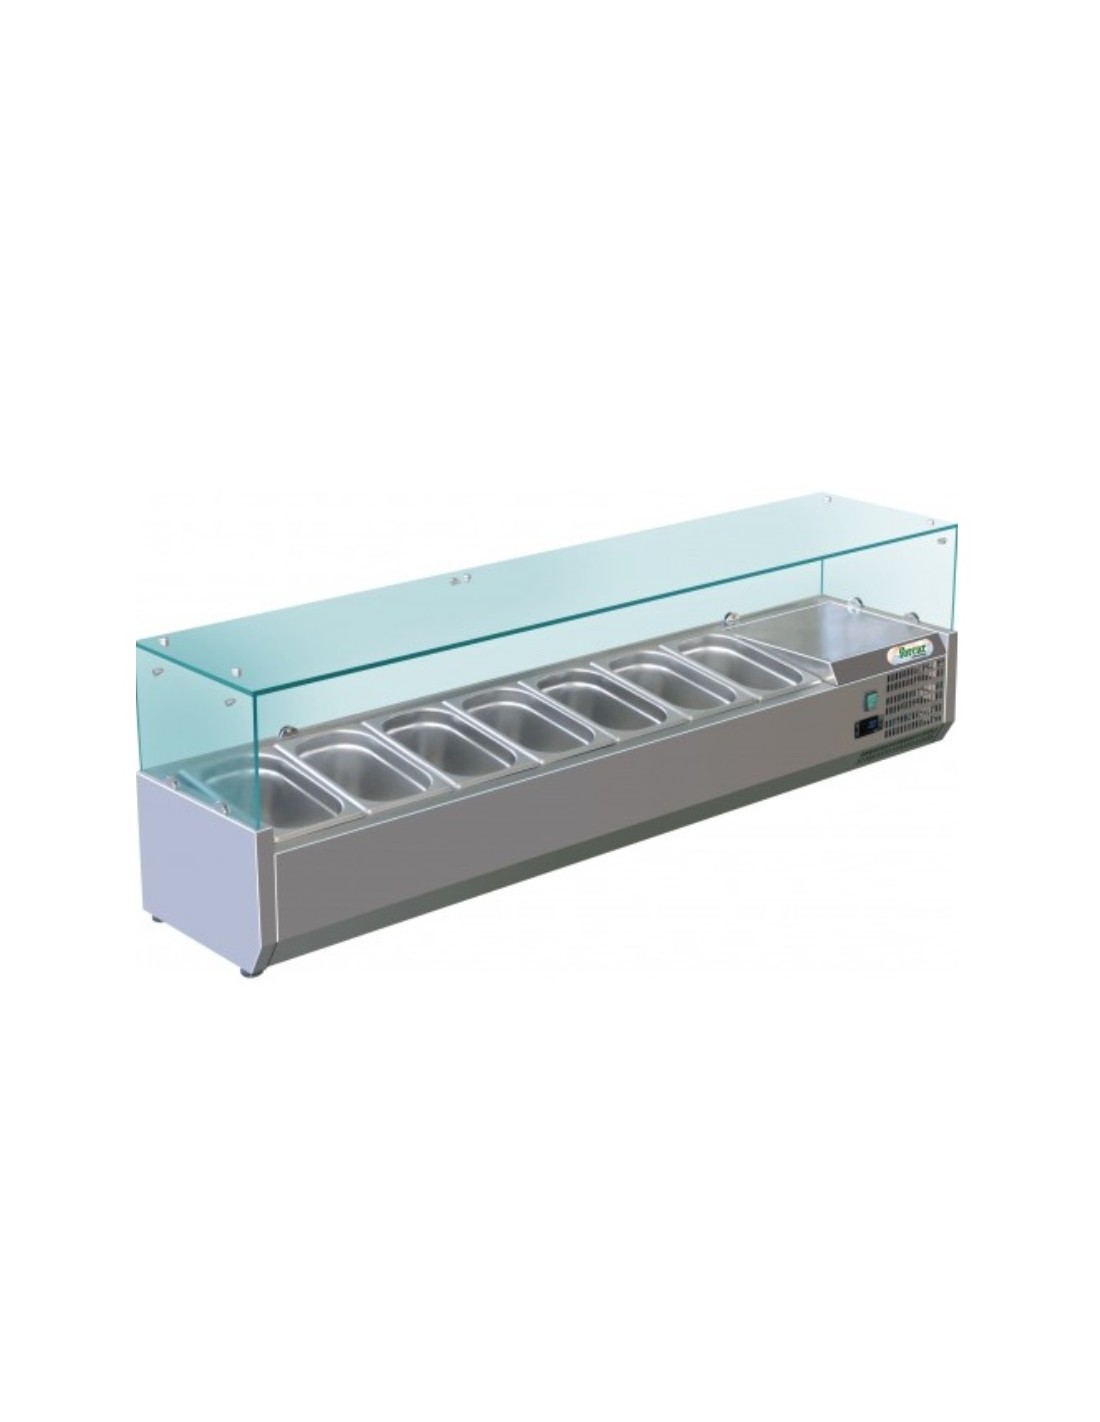 Refrigerated display case ingredients holder - RI15033V model - Static - Capacity 7 GN 1/4 - cm150 x 33 x 44.5h